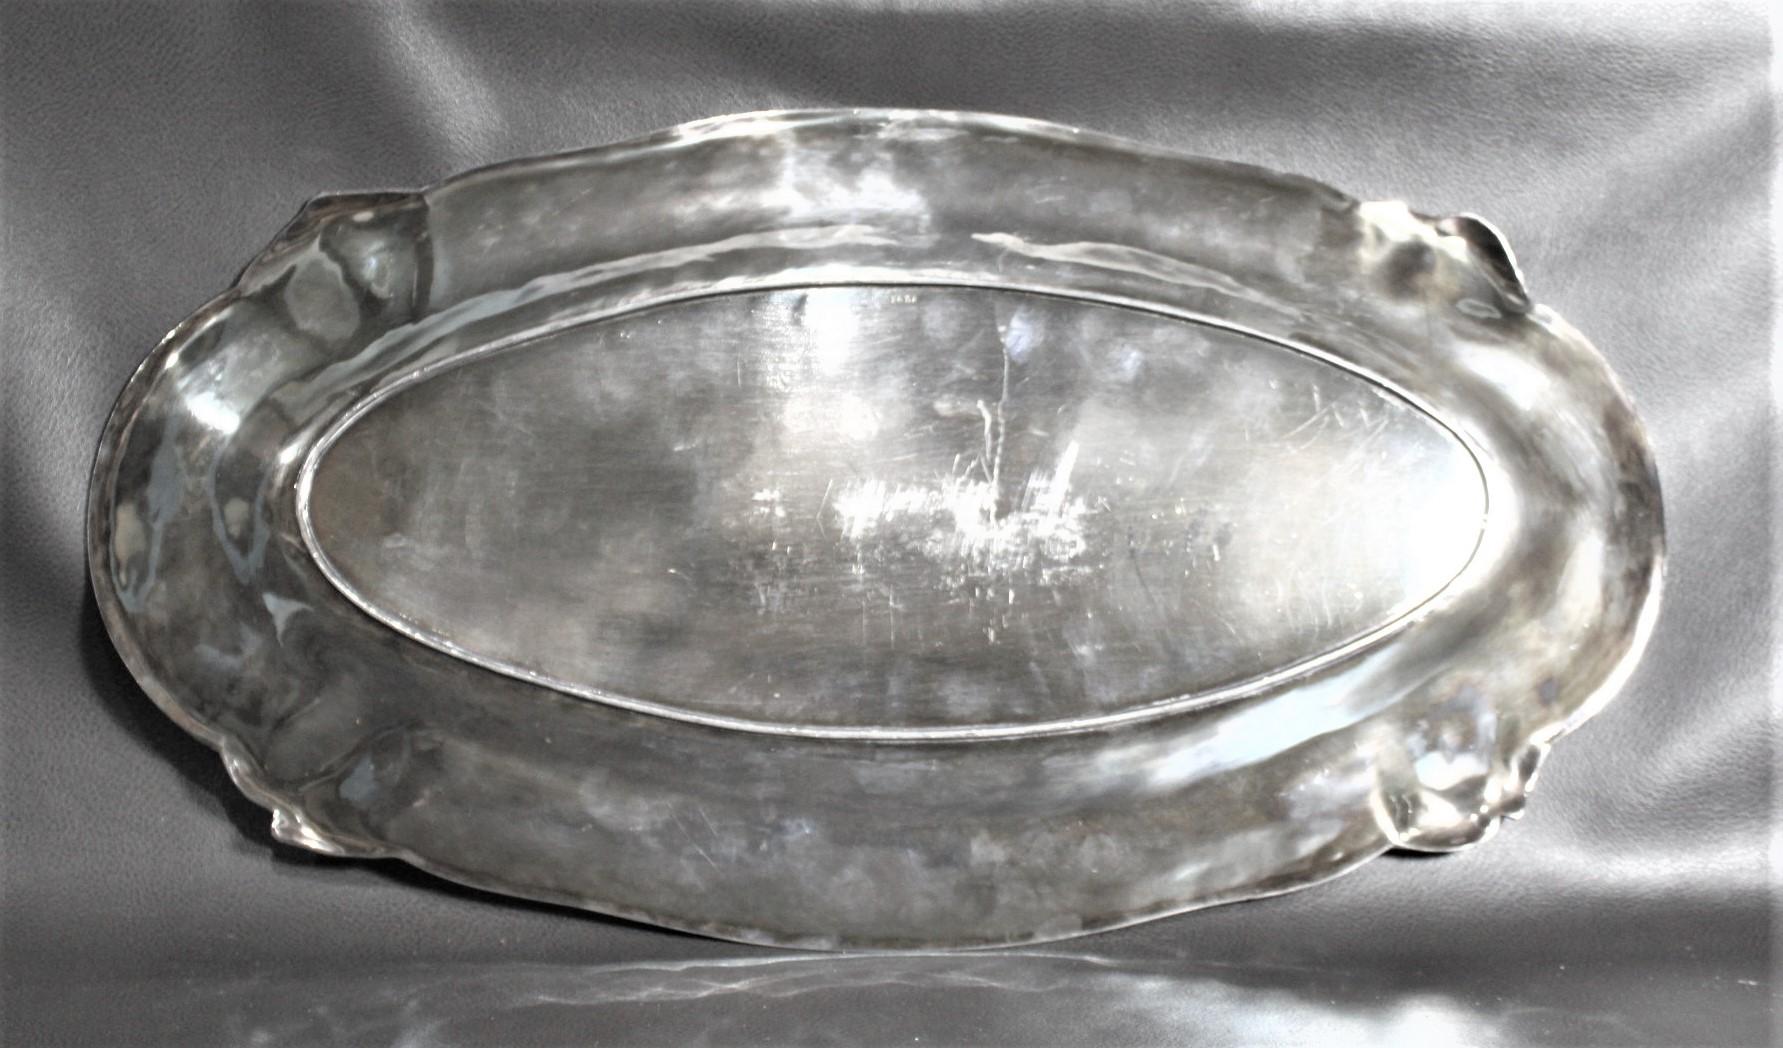 Antique Art Nouveau Silver Plated Oval Serving Tray with Raised Floral Motif For Sale 2